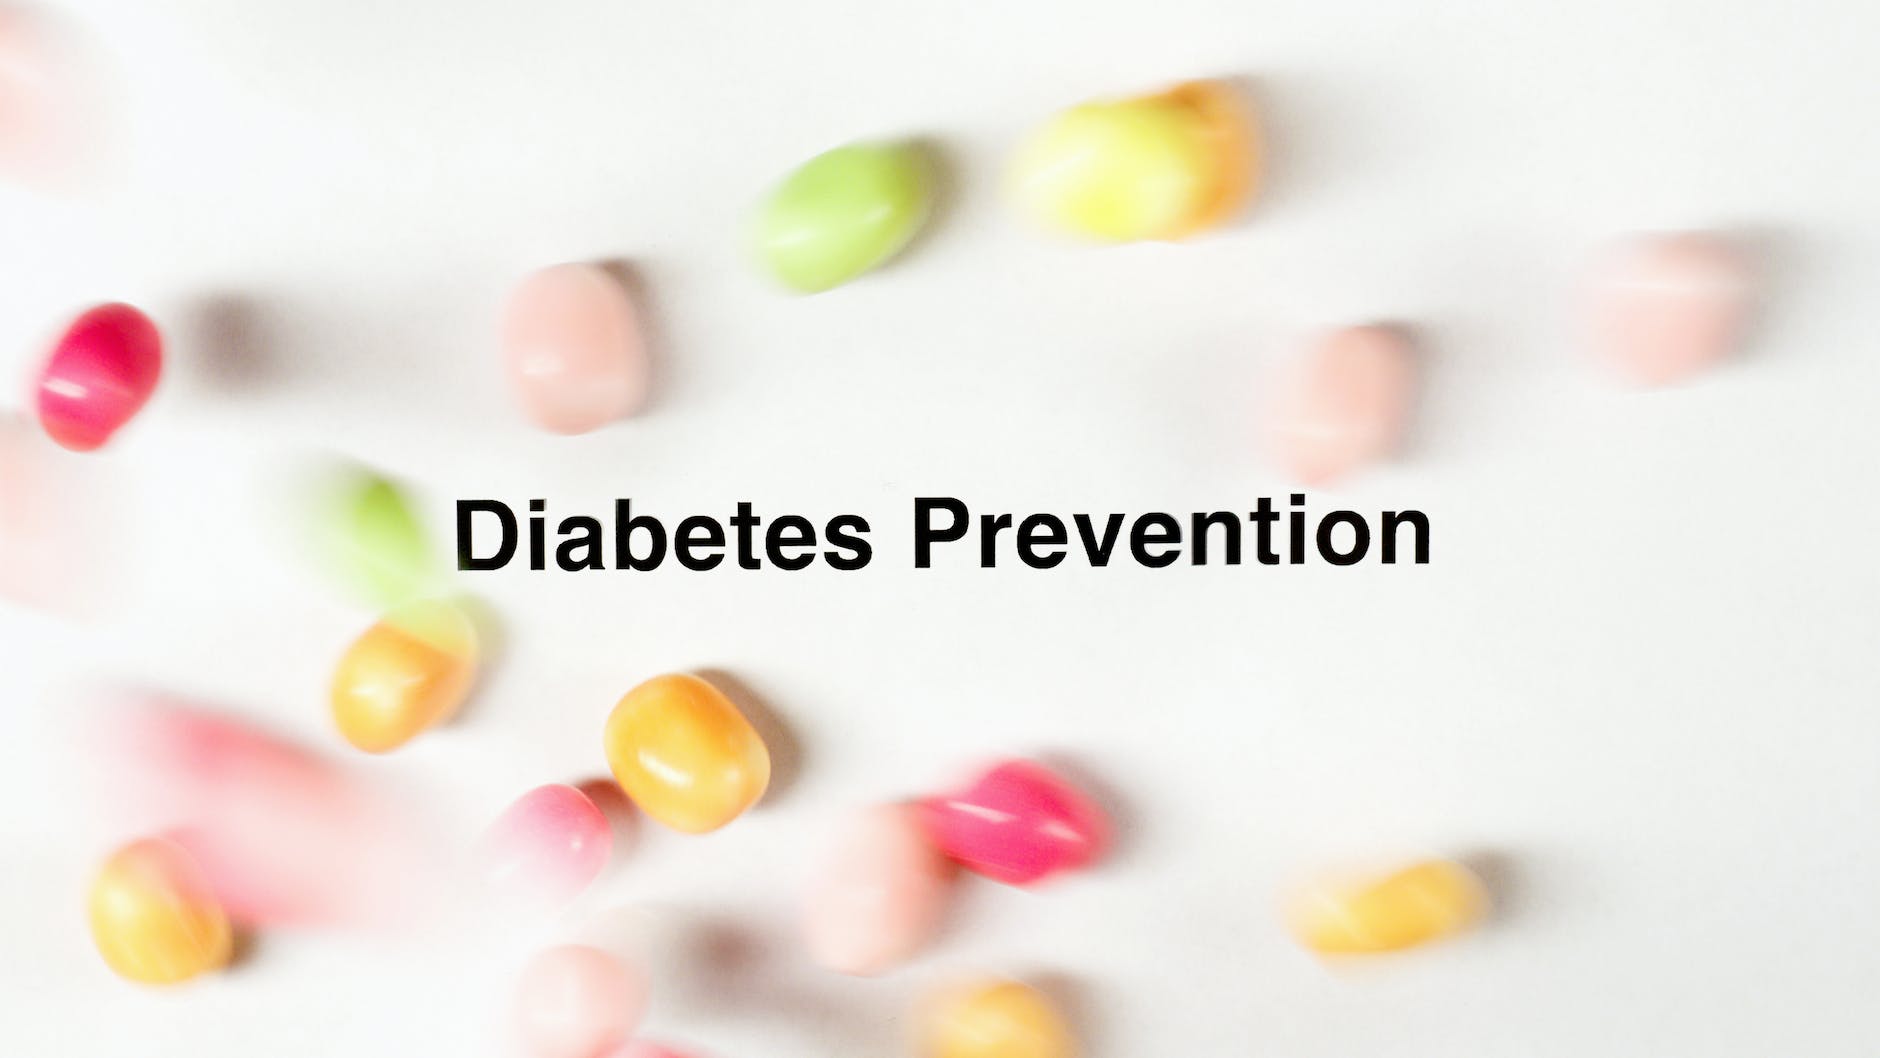 10 Steps on How to Prevent Diabetes